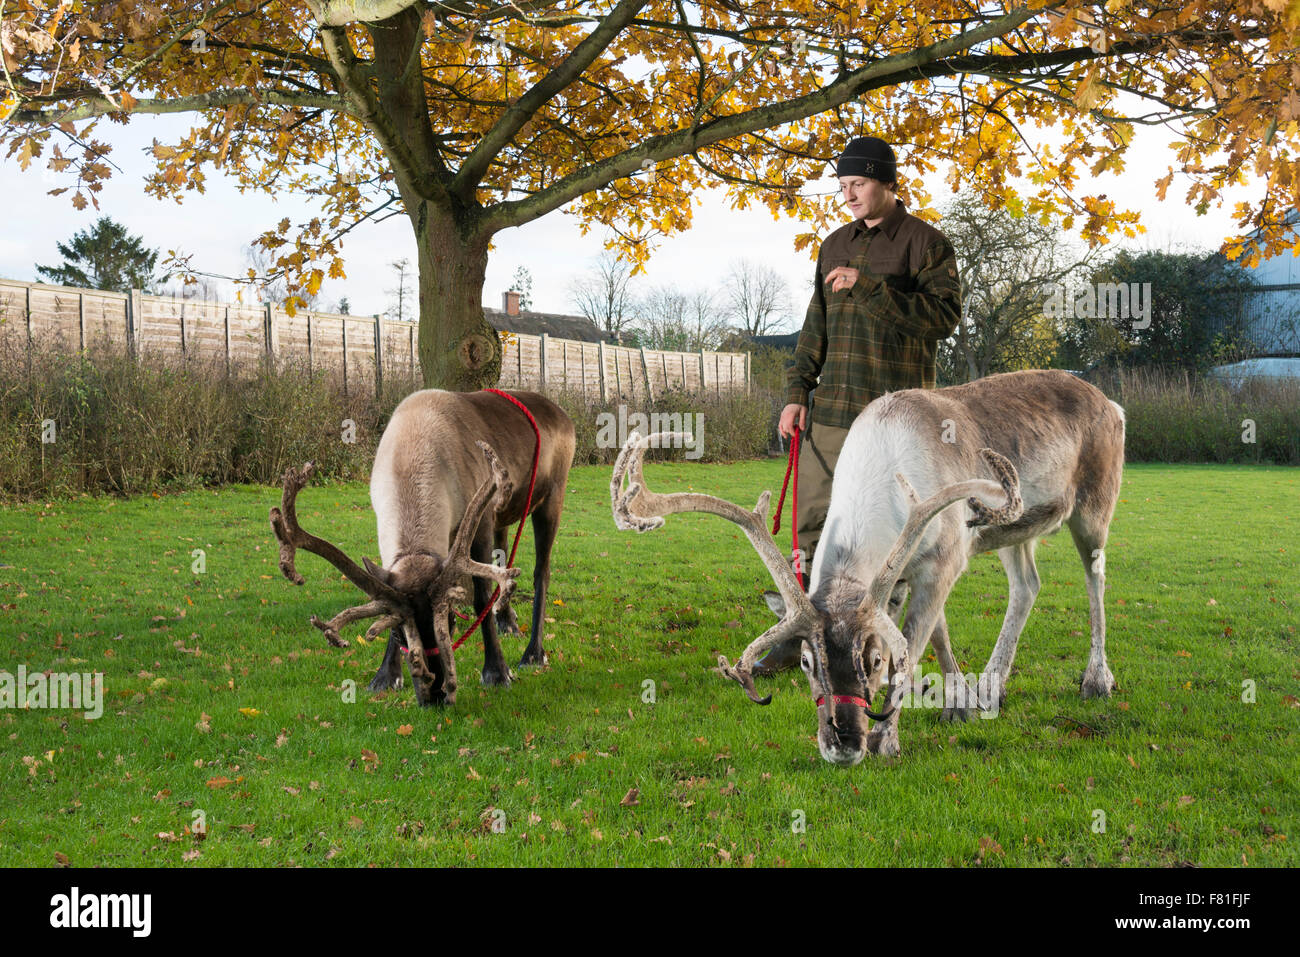 Barton, Cambridgeshire, UK.  4th December 2015, Alex Smith exercises reindeer at Bird’s Farm, Barton Cambridgeshire UK. They are from the Cairngorm Herd in Scotland, Britain’s only free-ranging reindeer herd. They are one of five teams from the herd touring the UK appearing at Christmas events. They spend the rest of the year living wild in the Cairngorm mountains. The reindeer are called Moose, Kips, Parfa, Svalbard, Monty and Wolmond. Credit Julian Eales/Alamy Live News Stock Photo